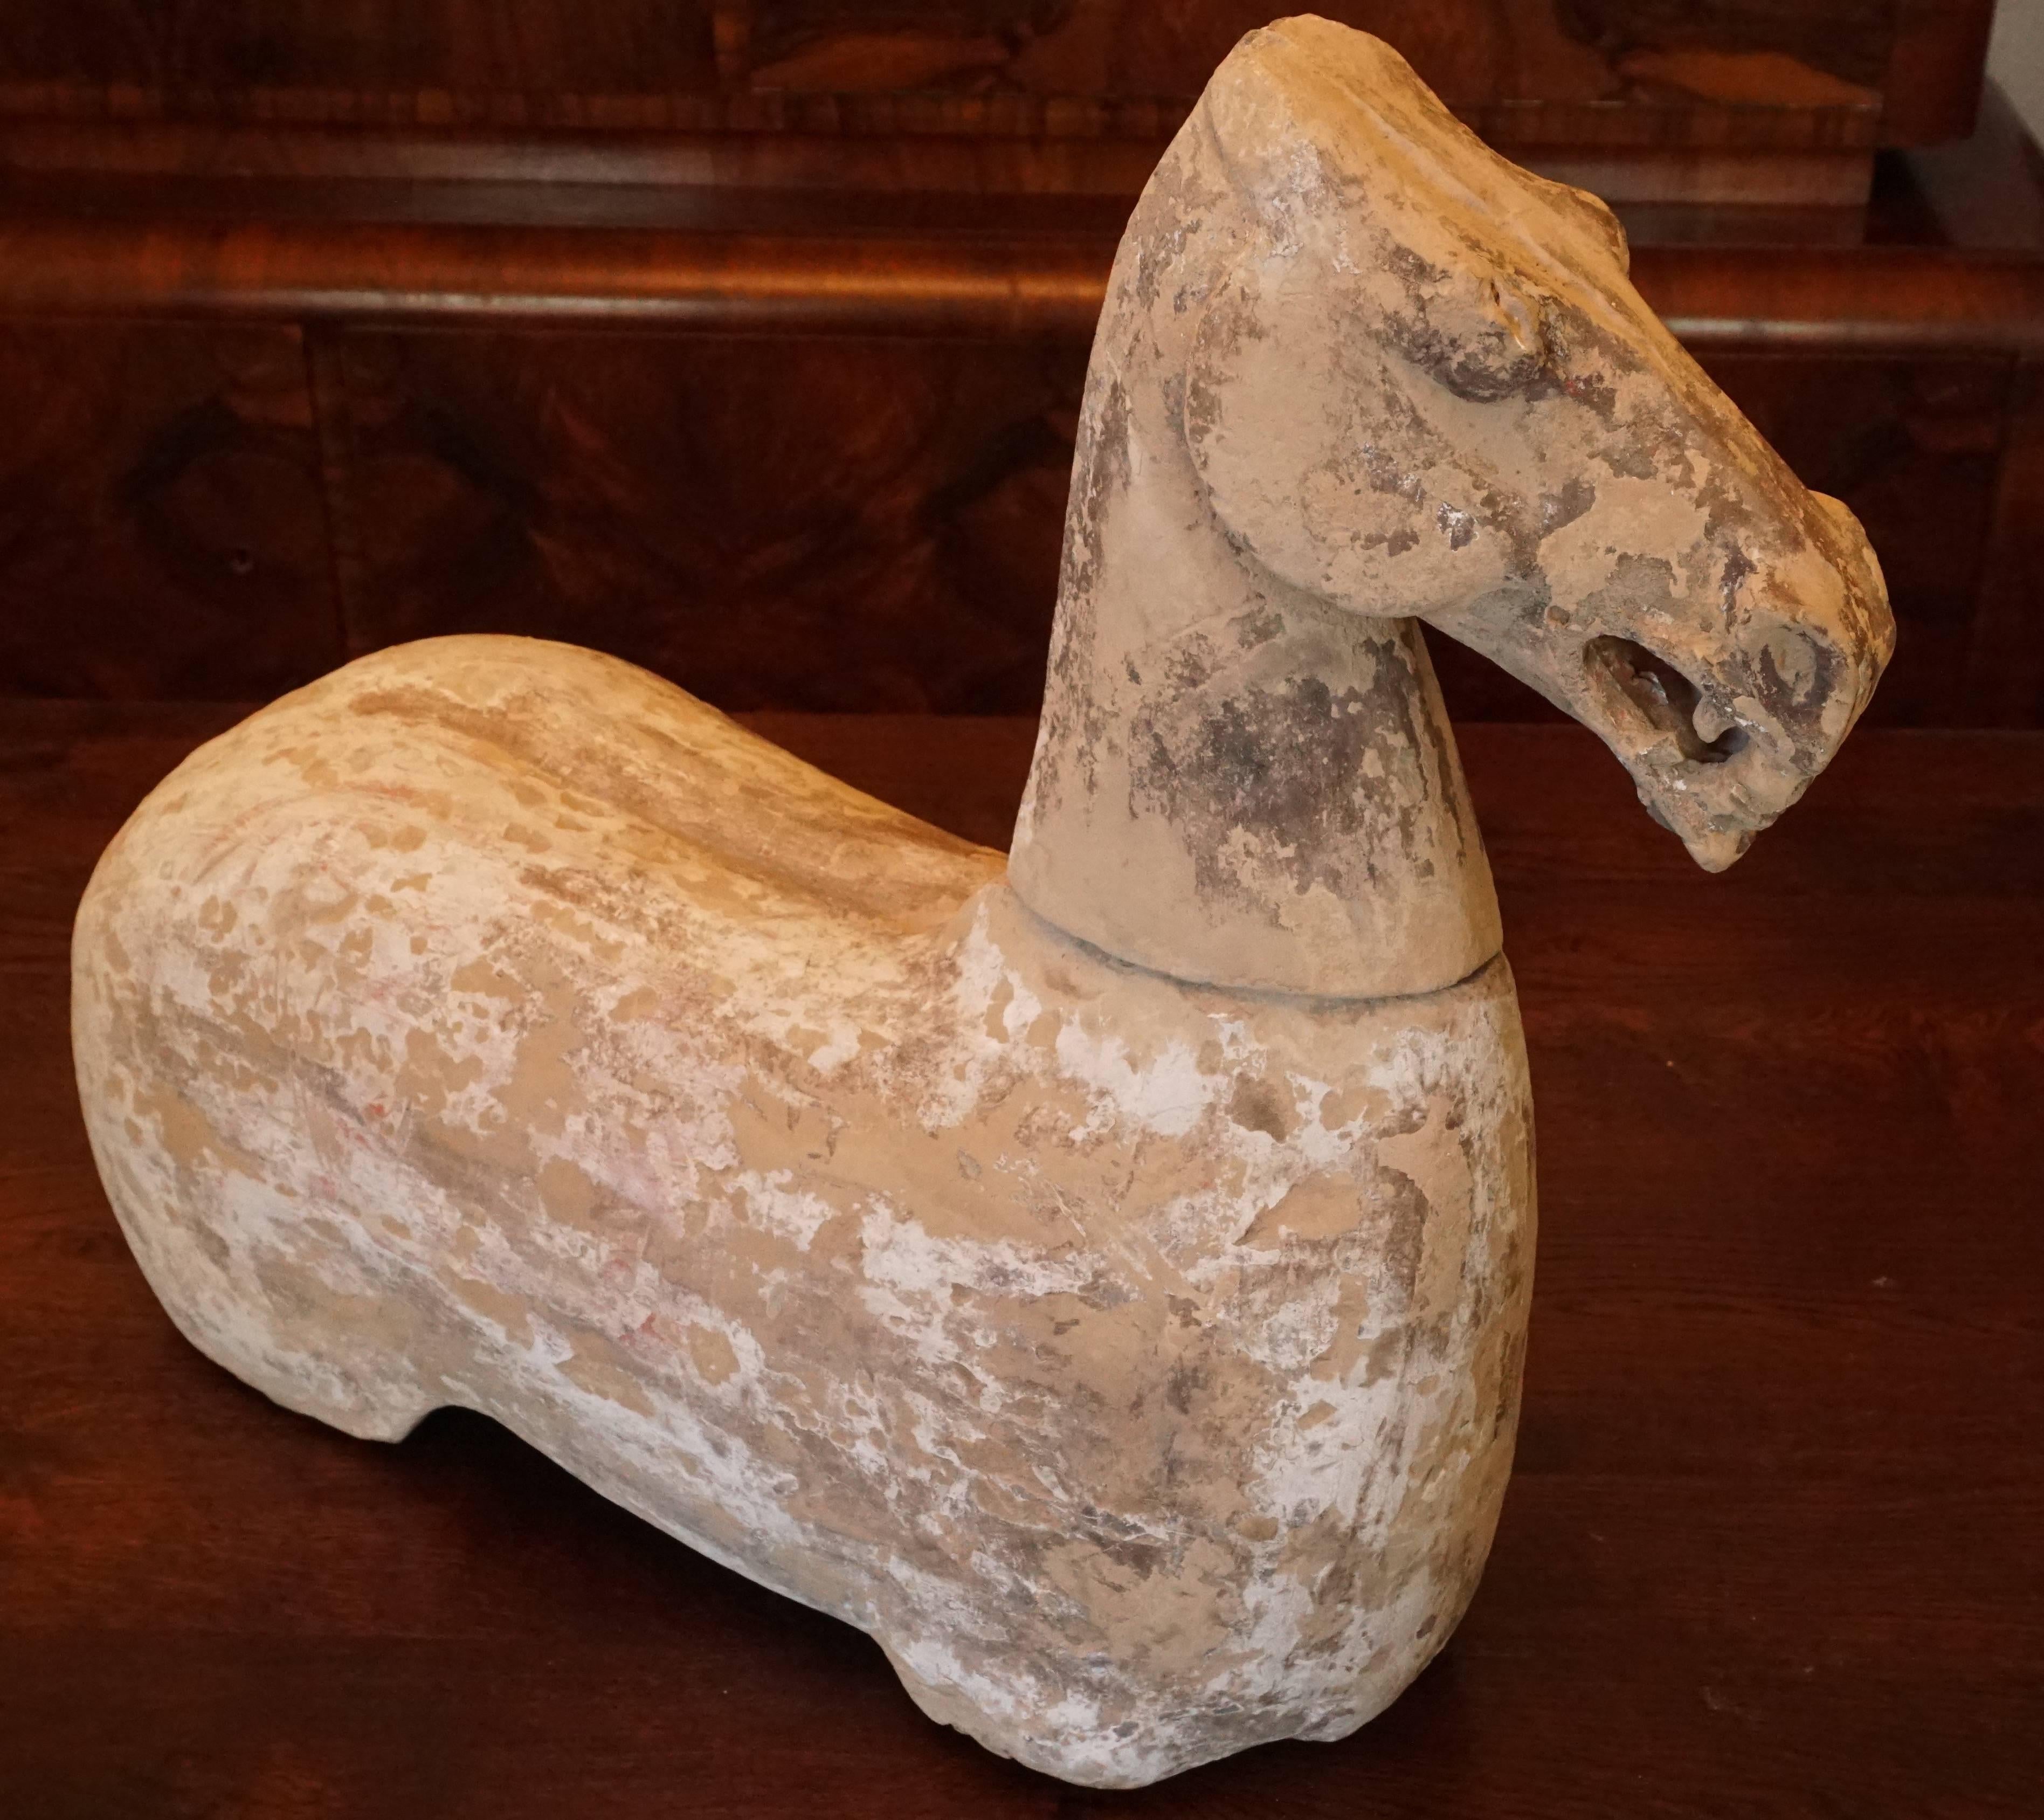 A Chinese Han style terracotta horse figure. Very decorative and large making a bold statement. Two pieces (head and body)

Dimensions: 20-1/2 H x 21-1/2 W x 8 D inches (52.1 x 54.6 x 20.3 cm)

Provenance:
Martin Fung antiques, Hong Kong.
 